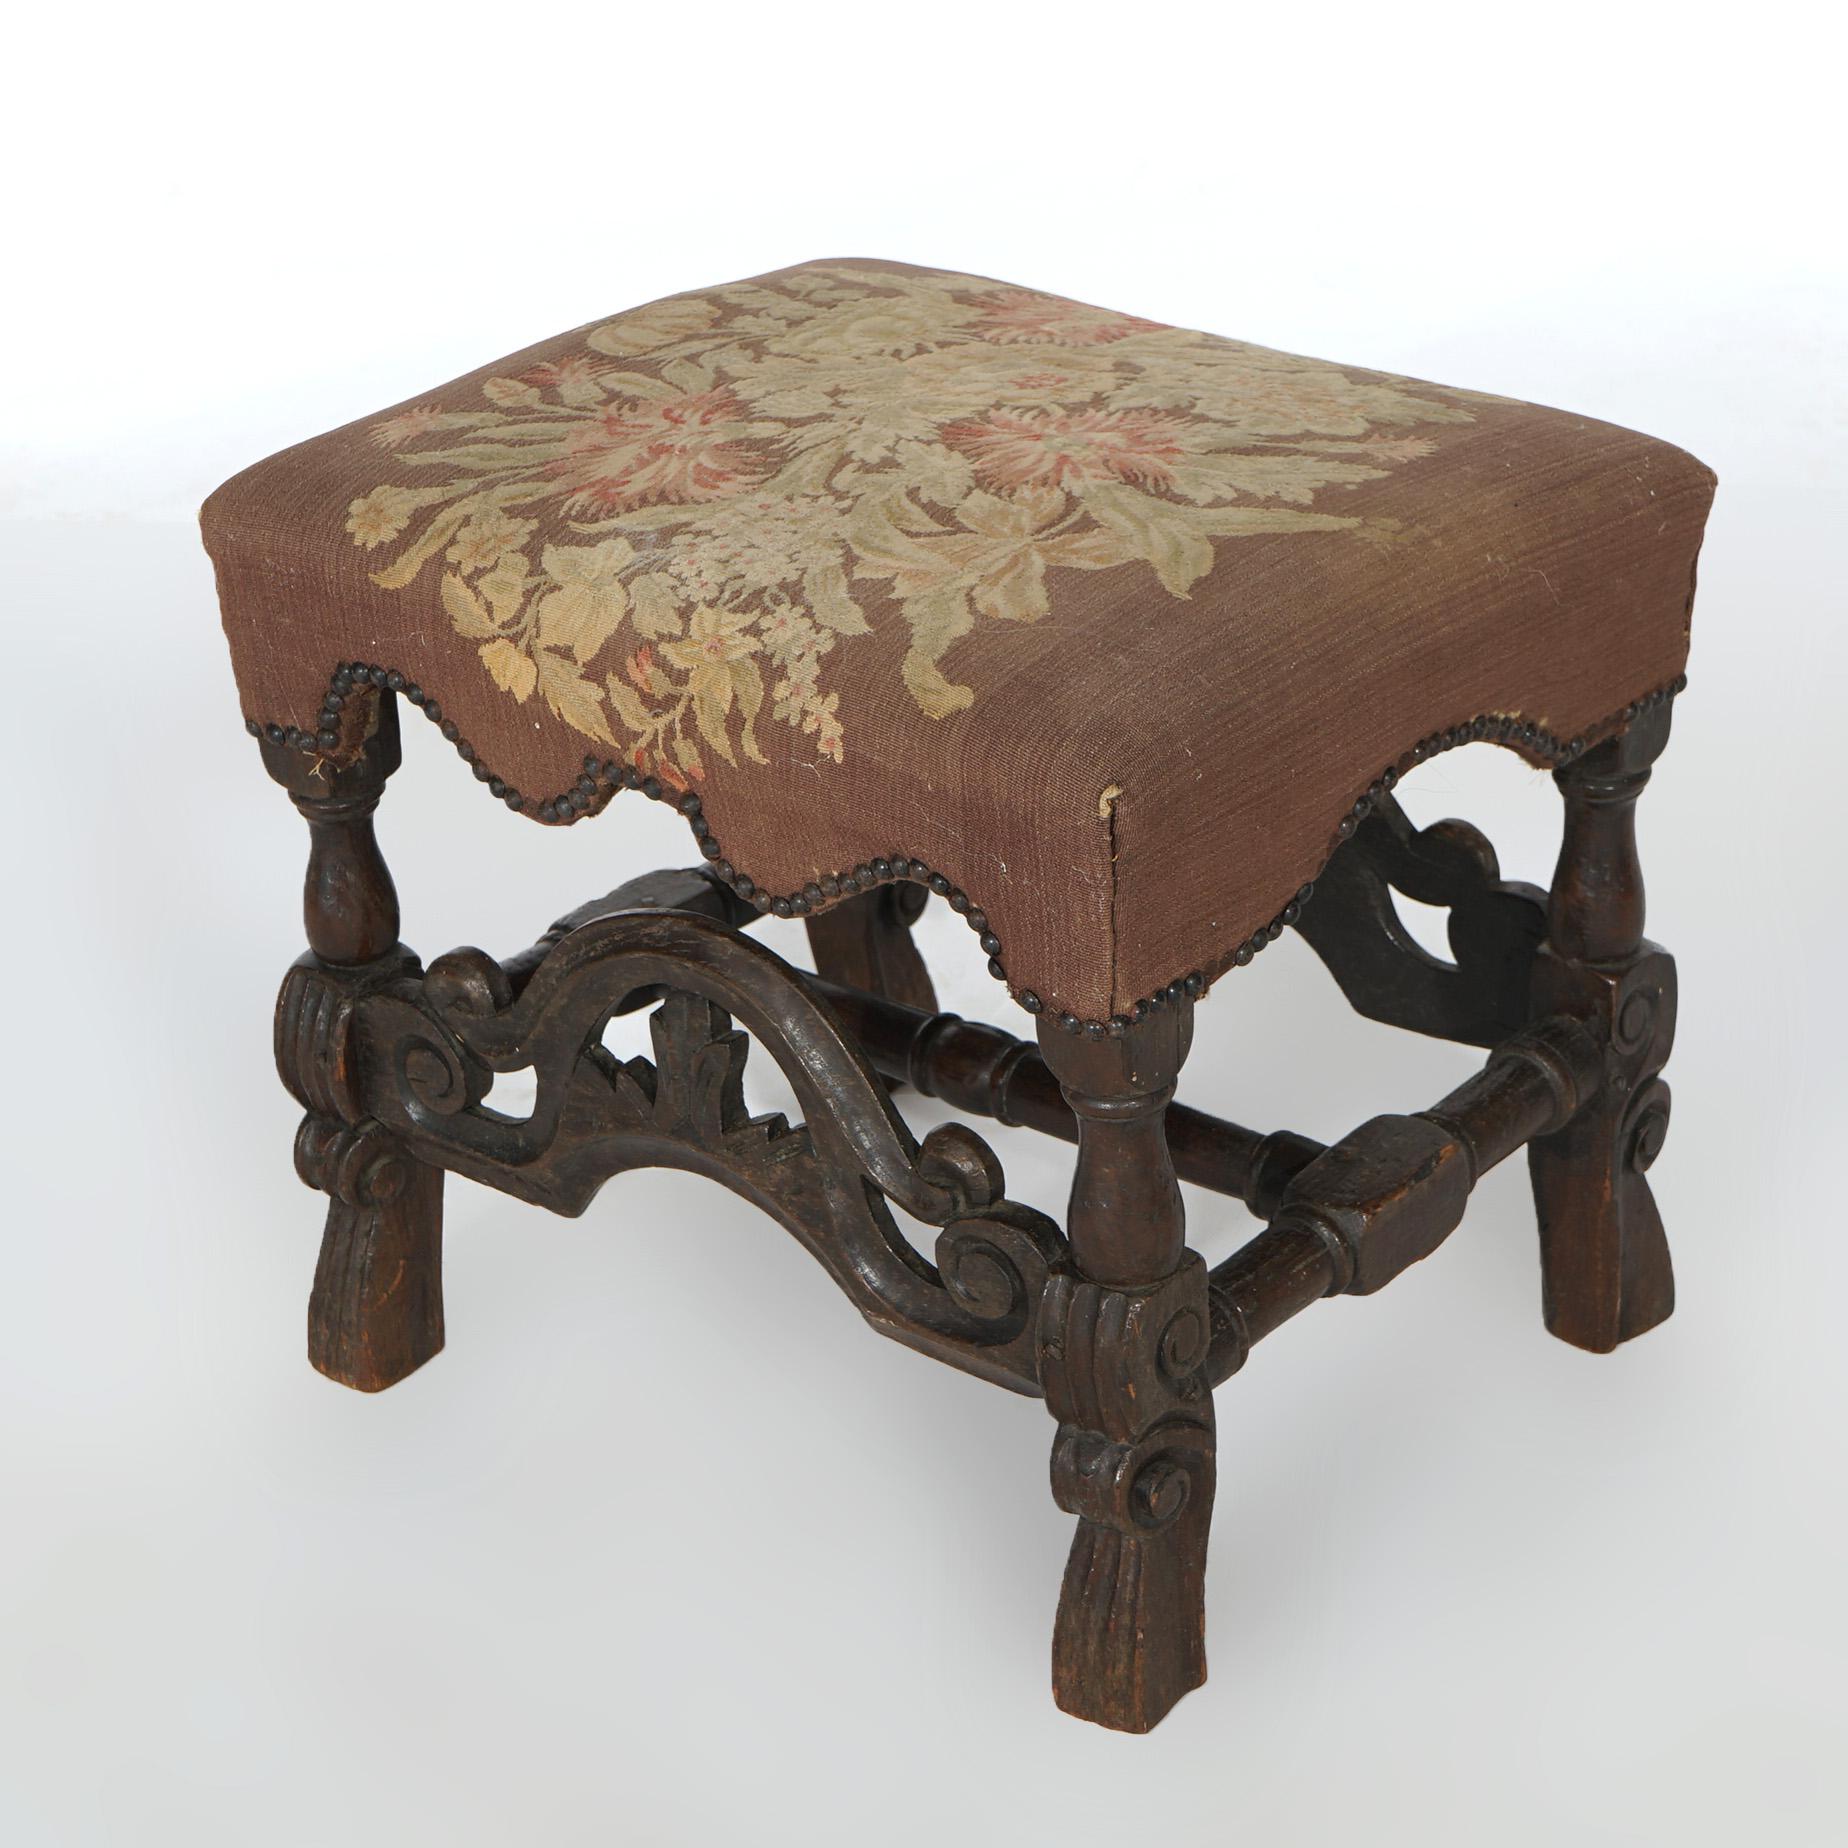 Early Antique English Carved Walnut & Needlepoint Bench (Stool) Circa 1690 In Good Condition For Sale In Big Flats, NY